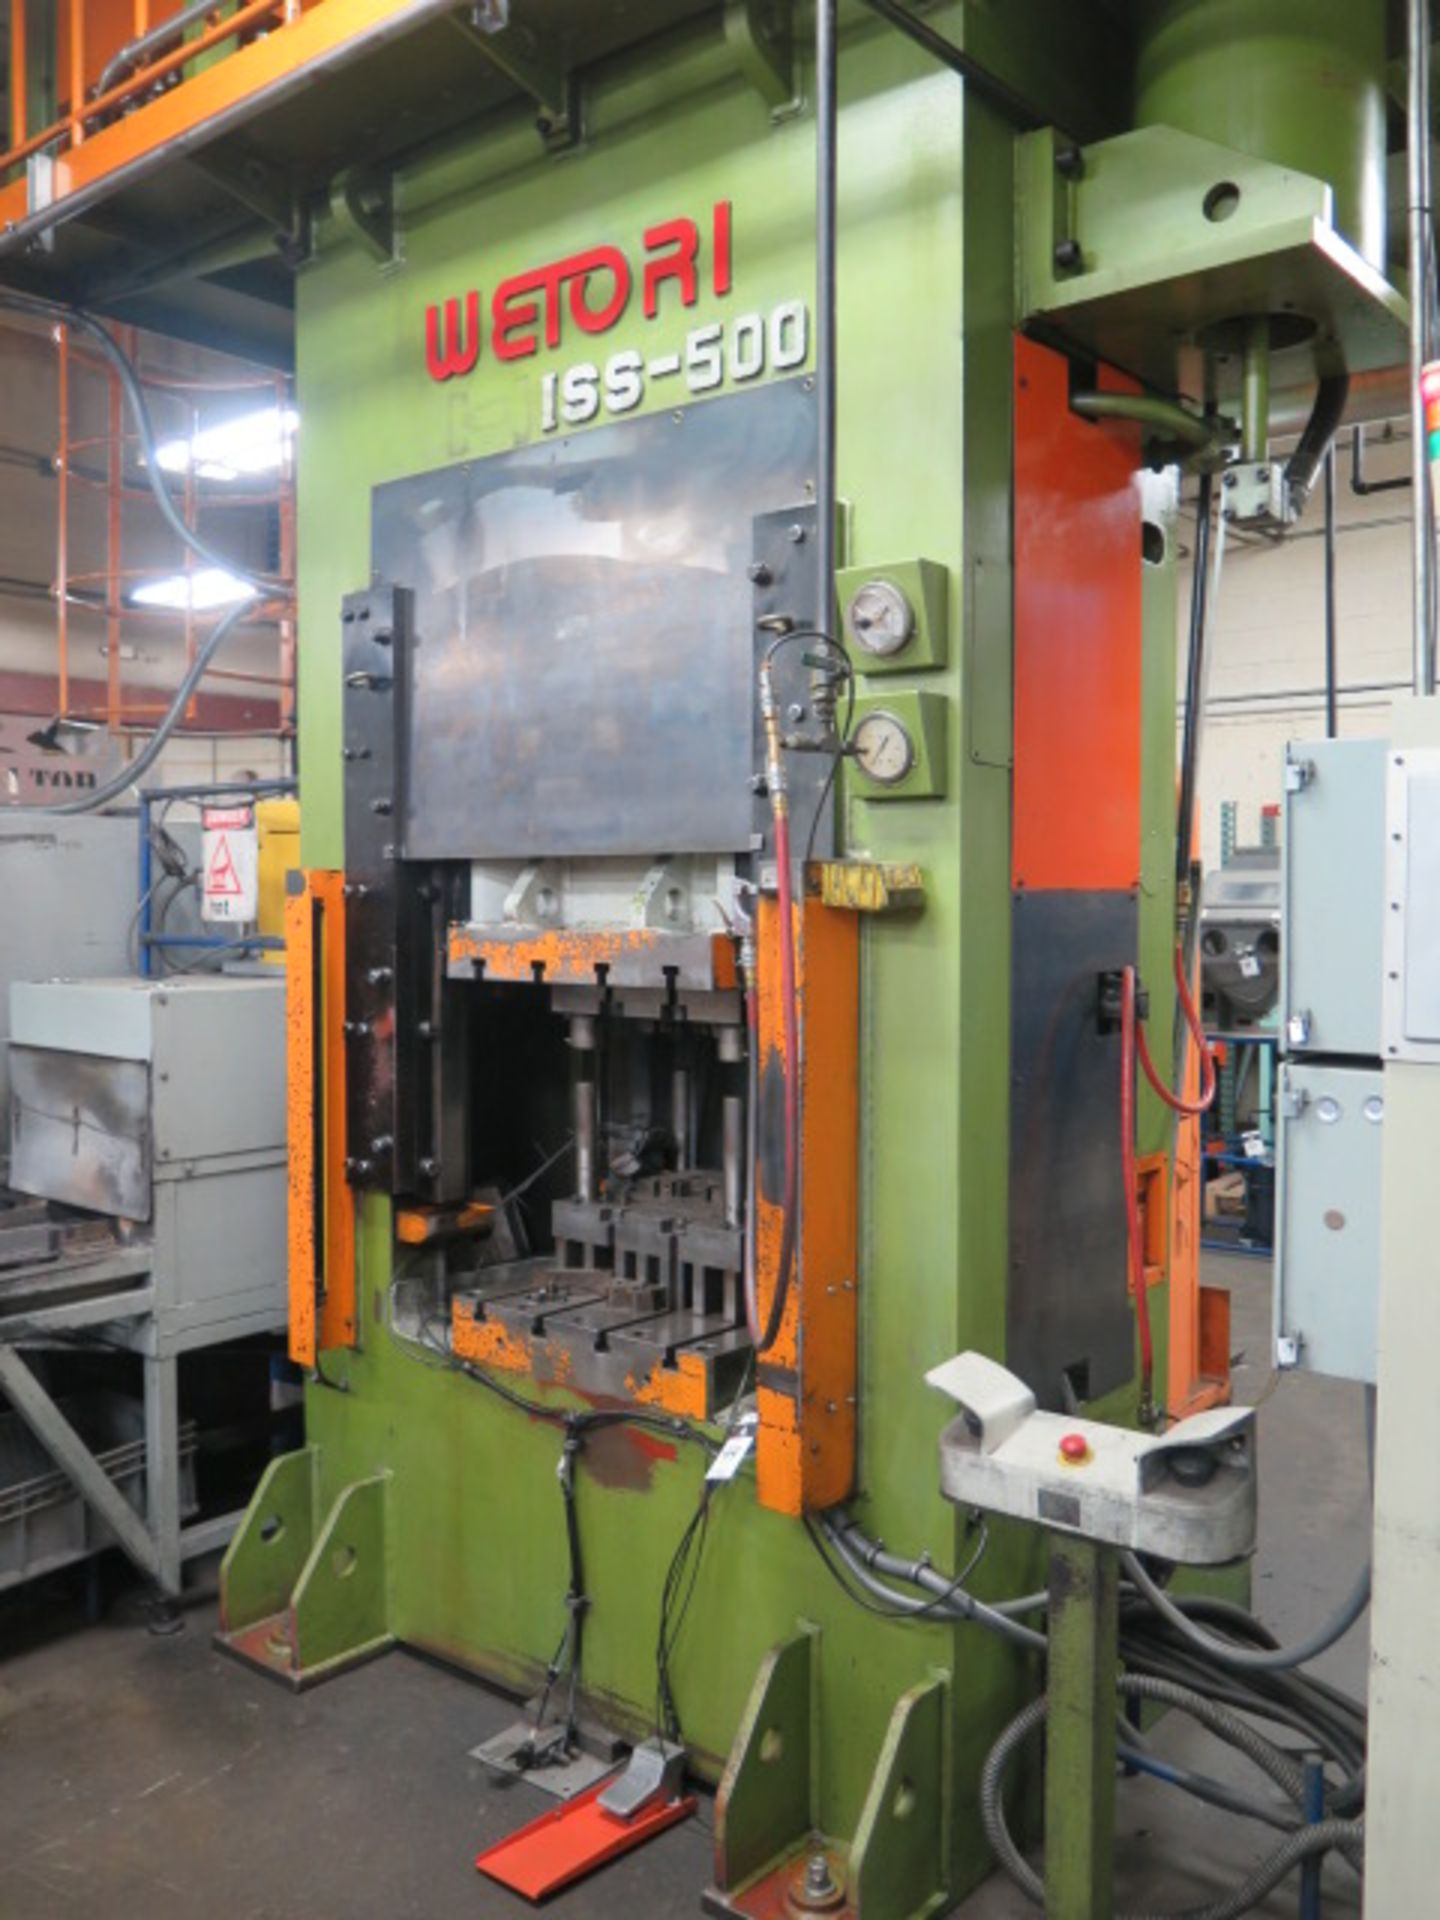 Wetori ISS-500 500 Ton Hot Forging Hydraulic Press w/ Phoenix Contact Touch Screen Cont, SOLD AS IS - Image 2 of 13